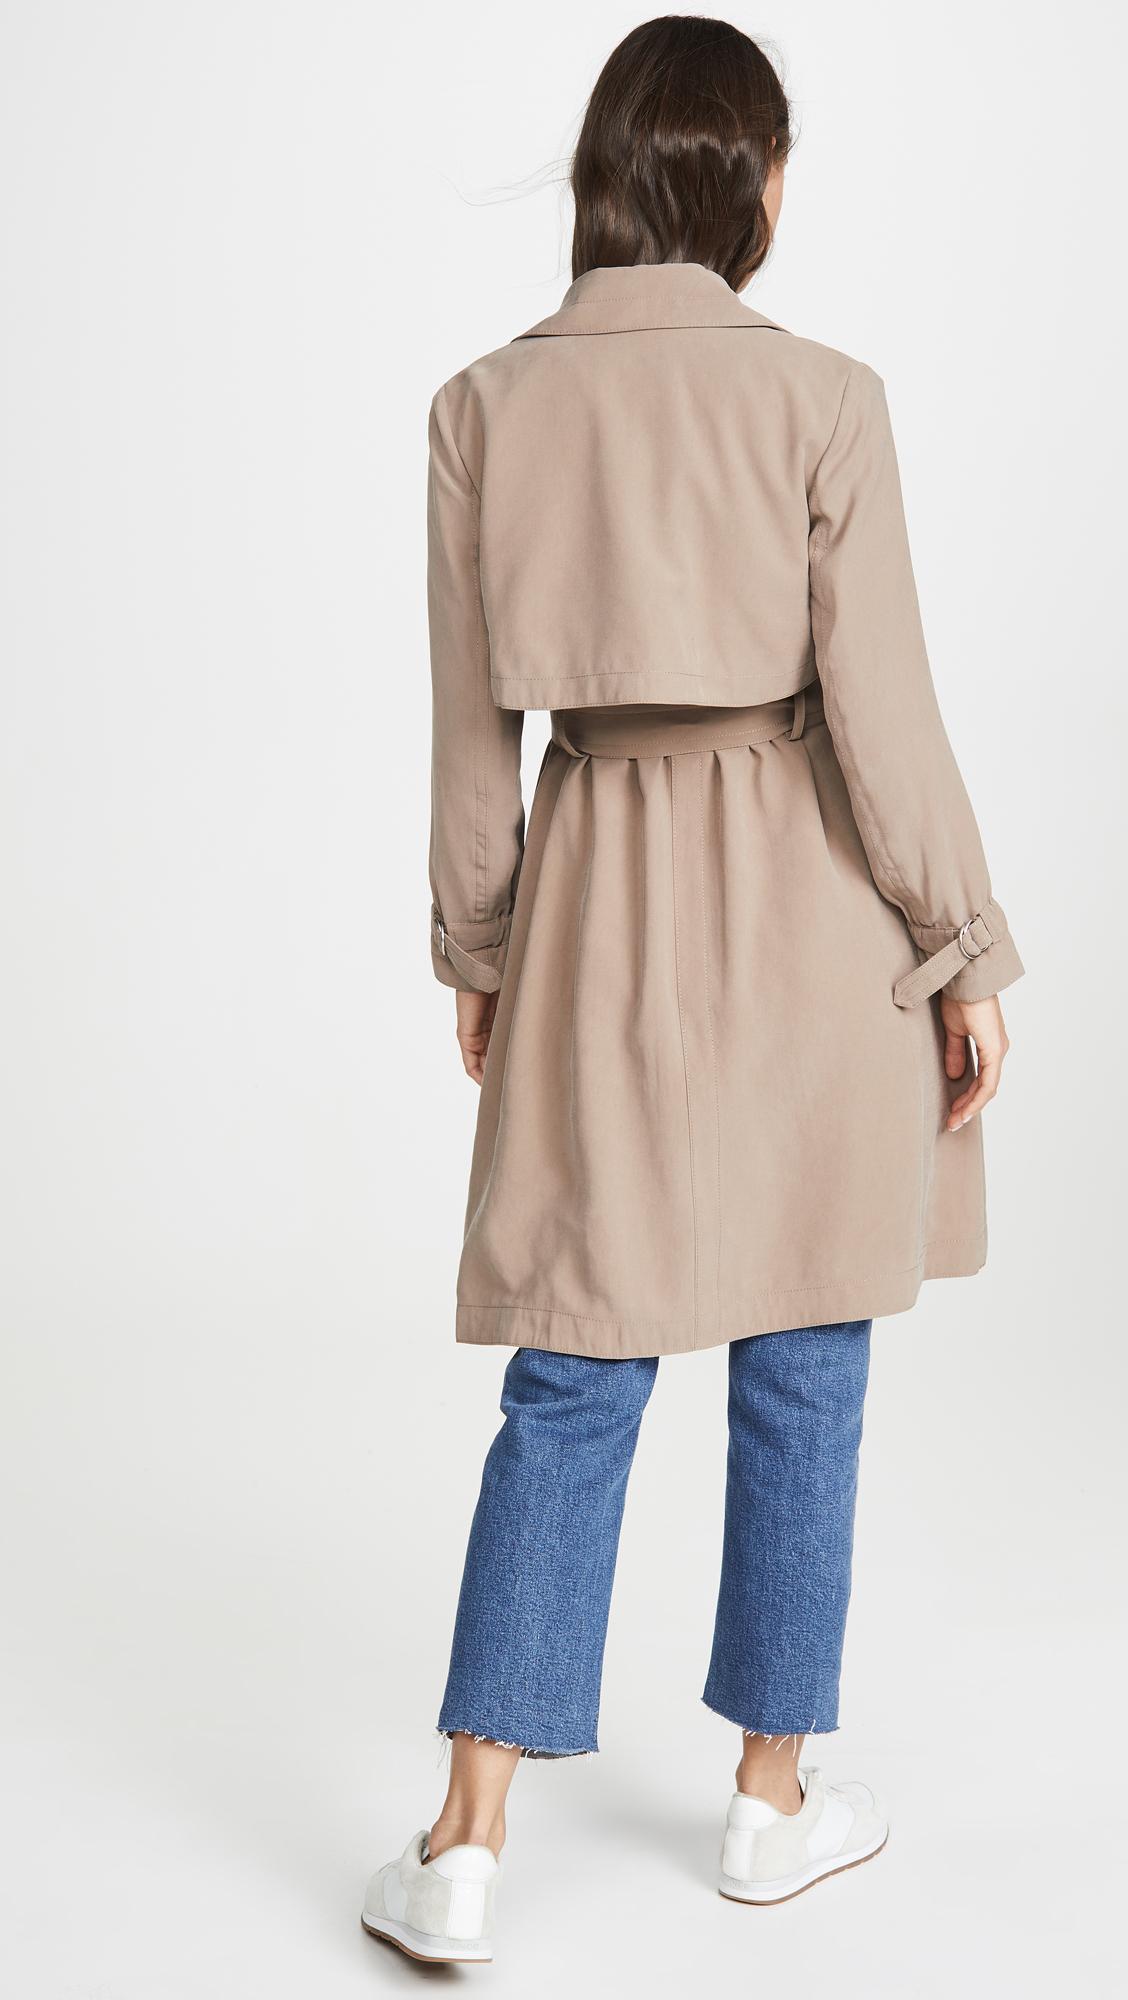 Club Monaco Synthetic Elima Trench Coat in Tan (Natural) - Lyst